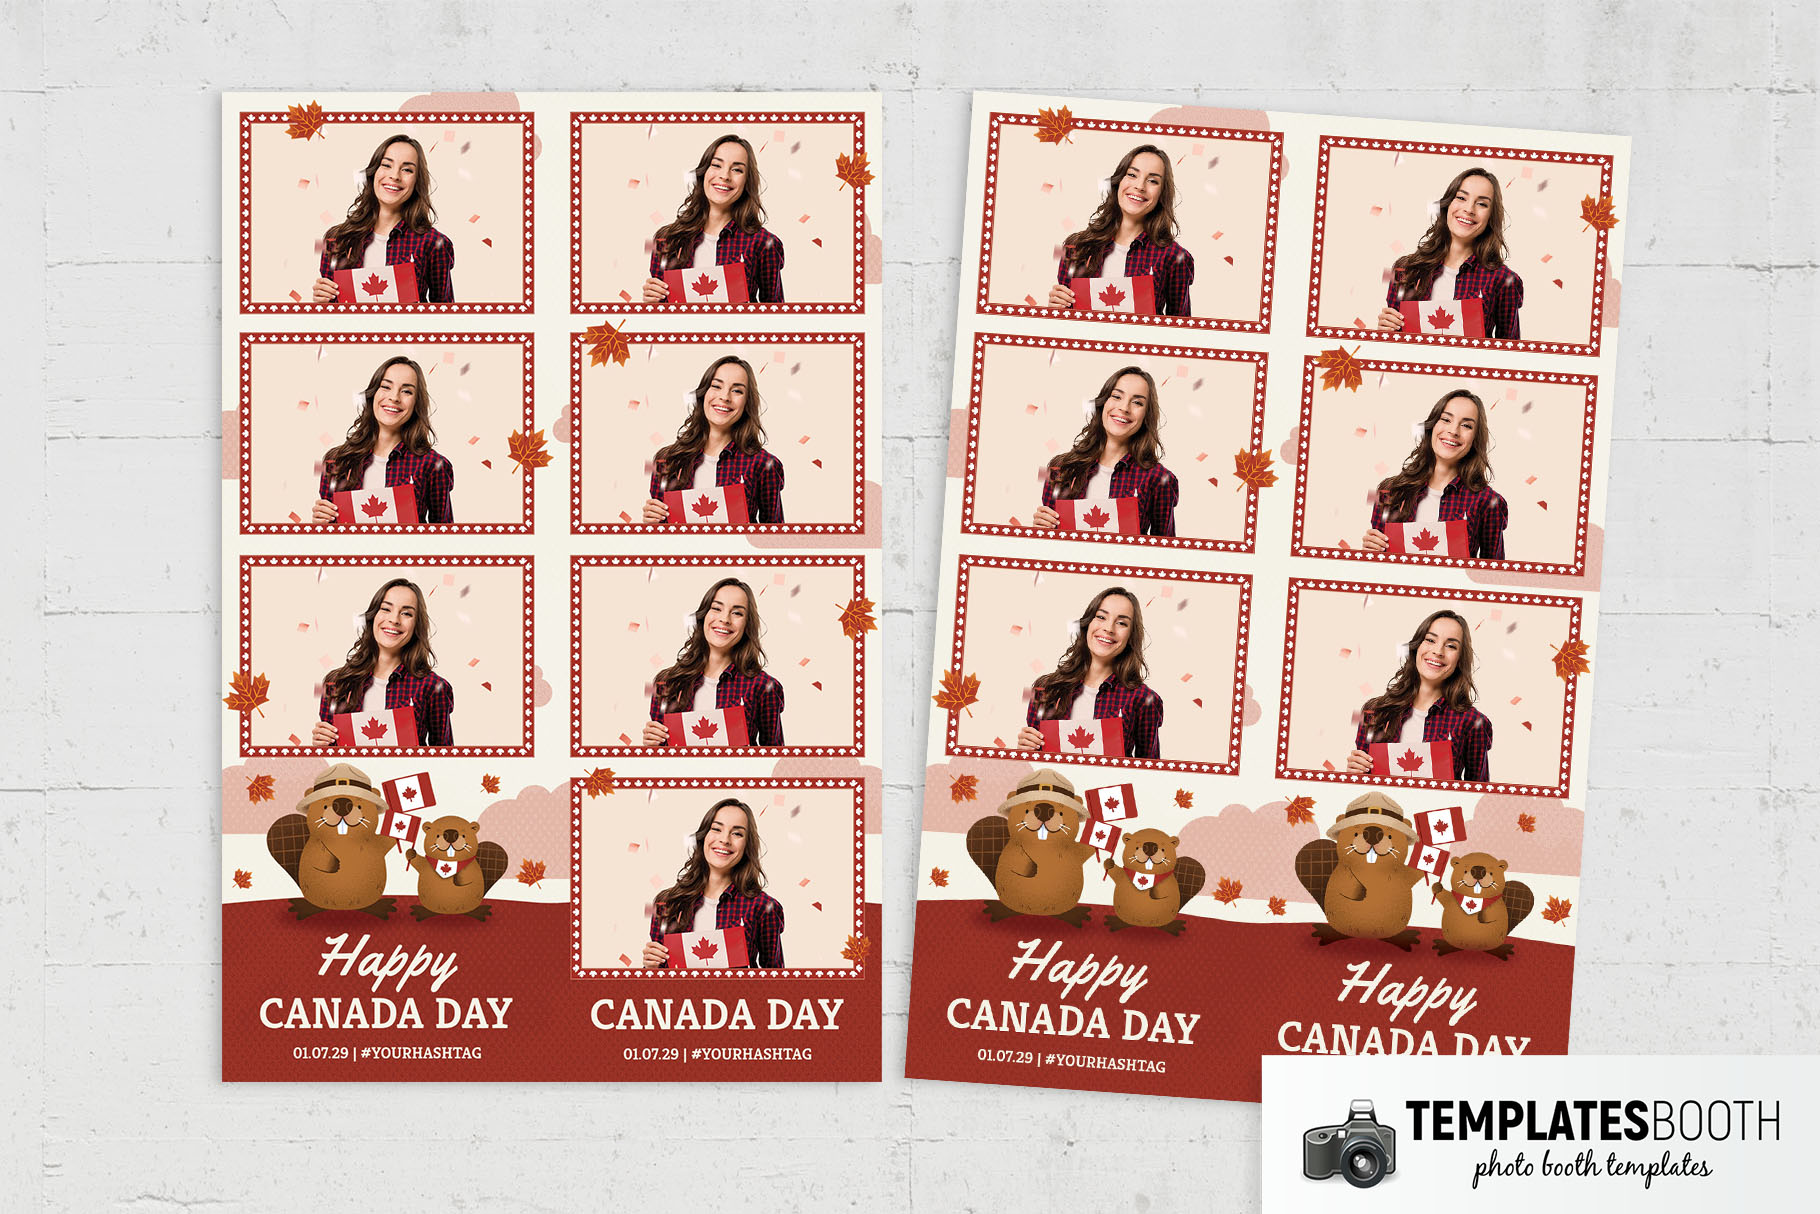 Canada Day Photo Booth Template v2